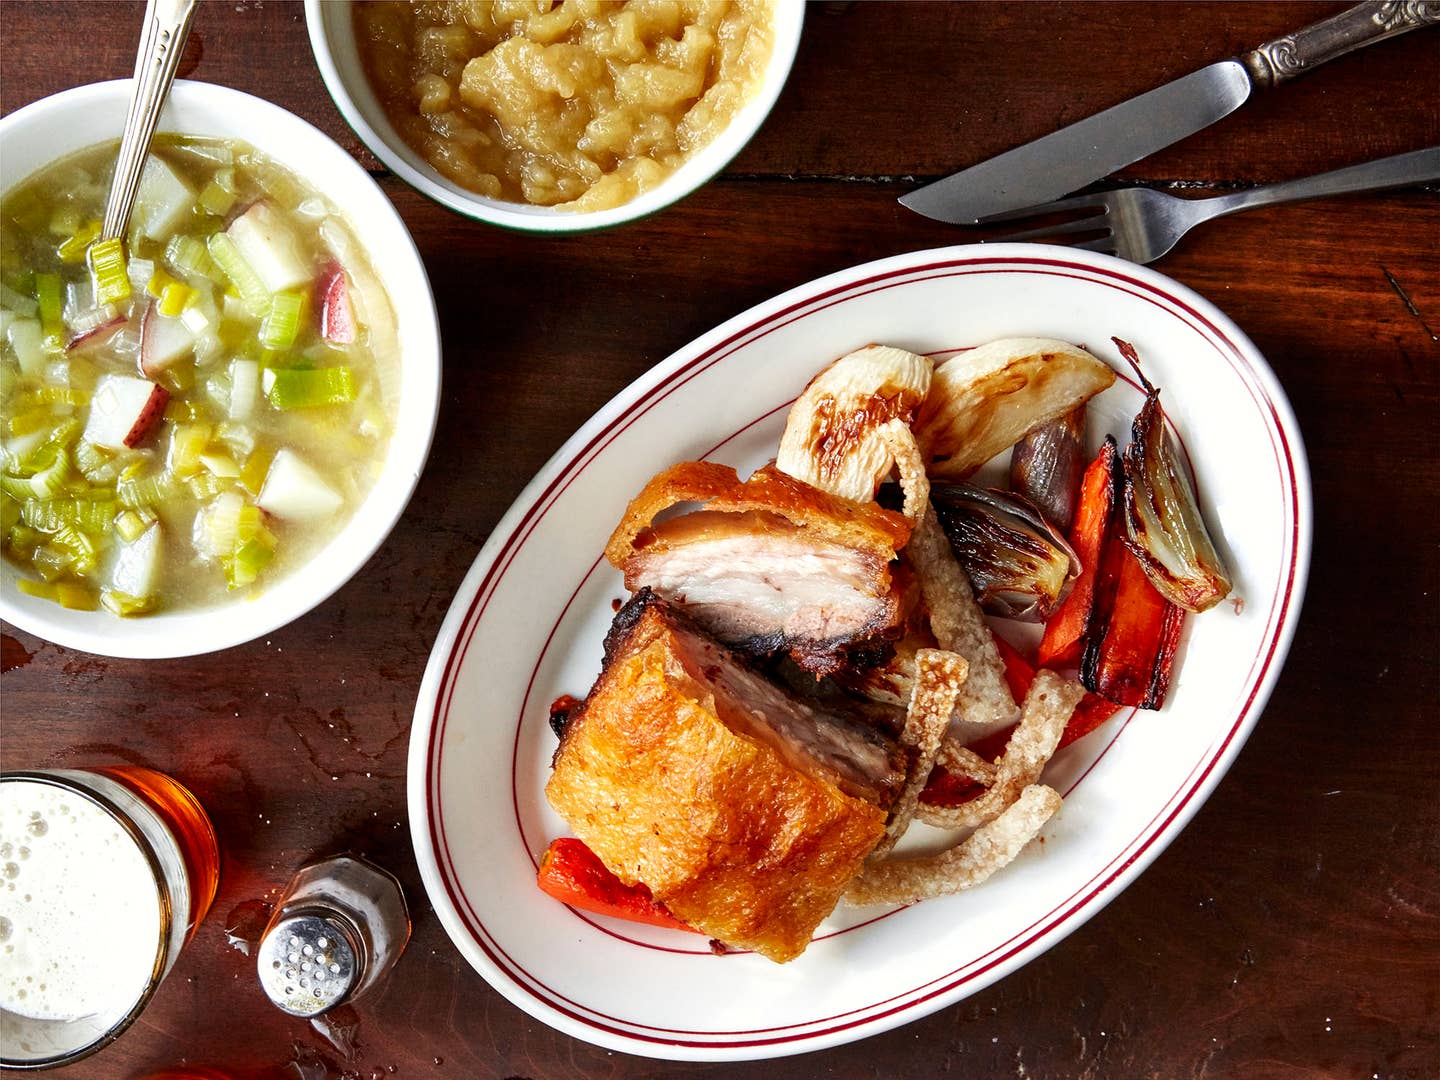 Crispy Pork Belly with Roasted Vegetables and Applesauce